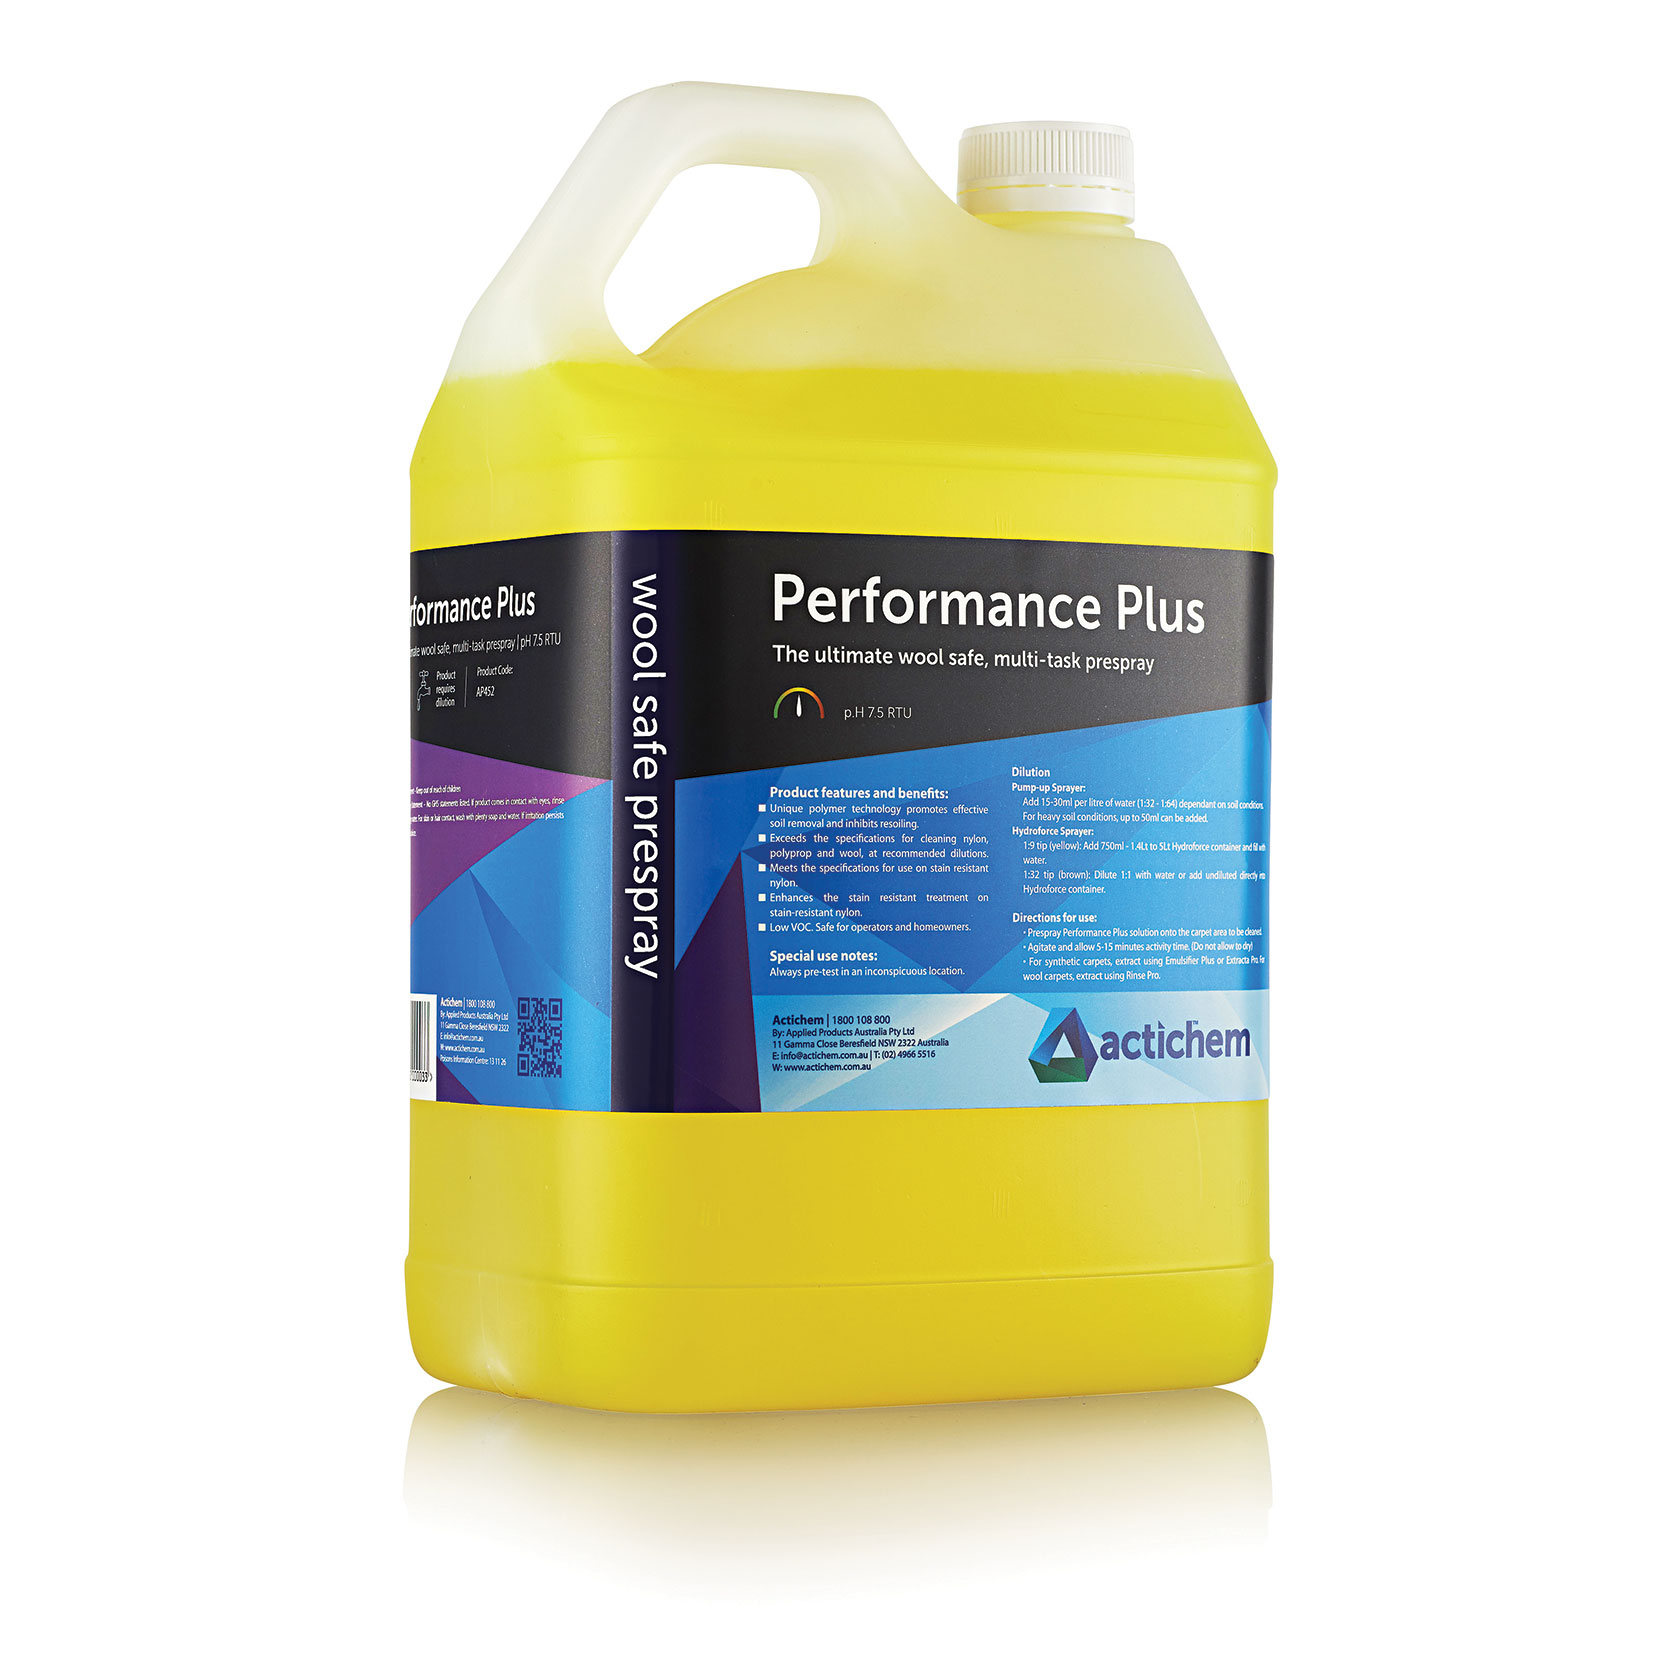 Multi-task prespray detergent for hot water extraction carpet cleaning